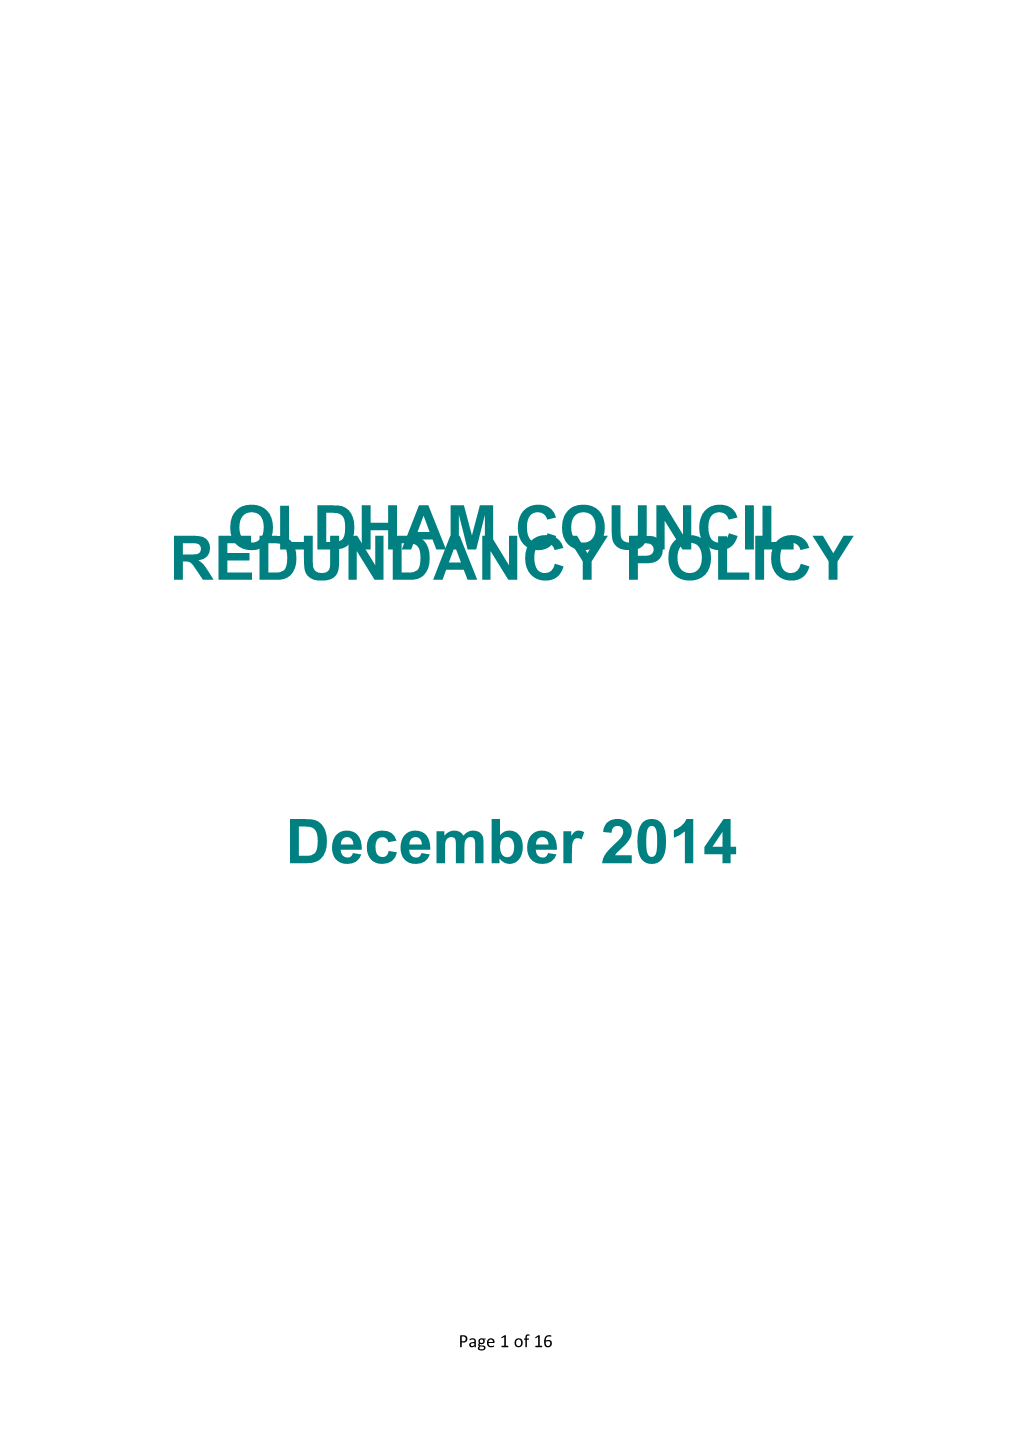 Redundancy Policy Introduction